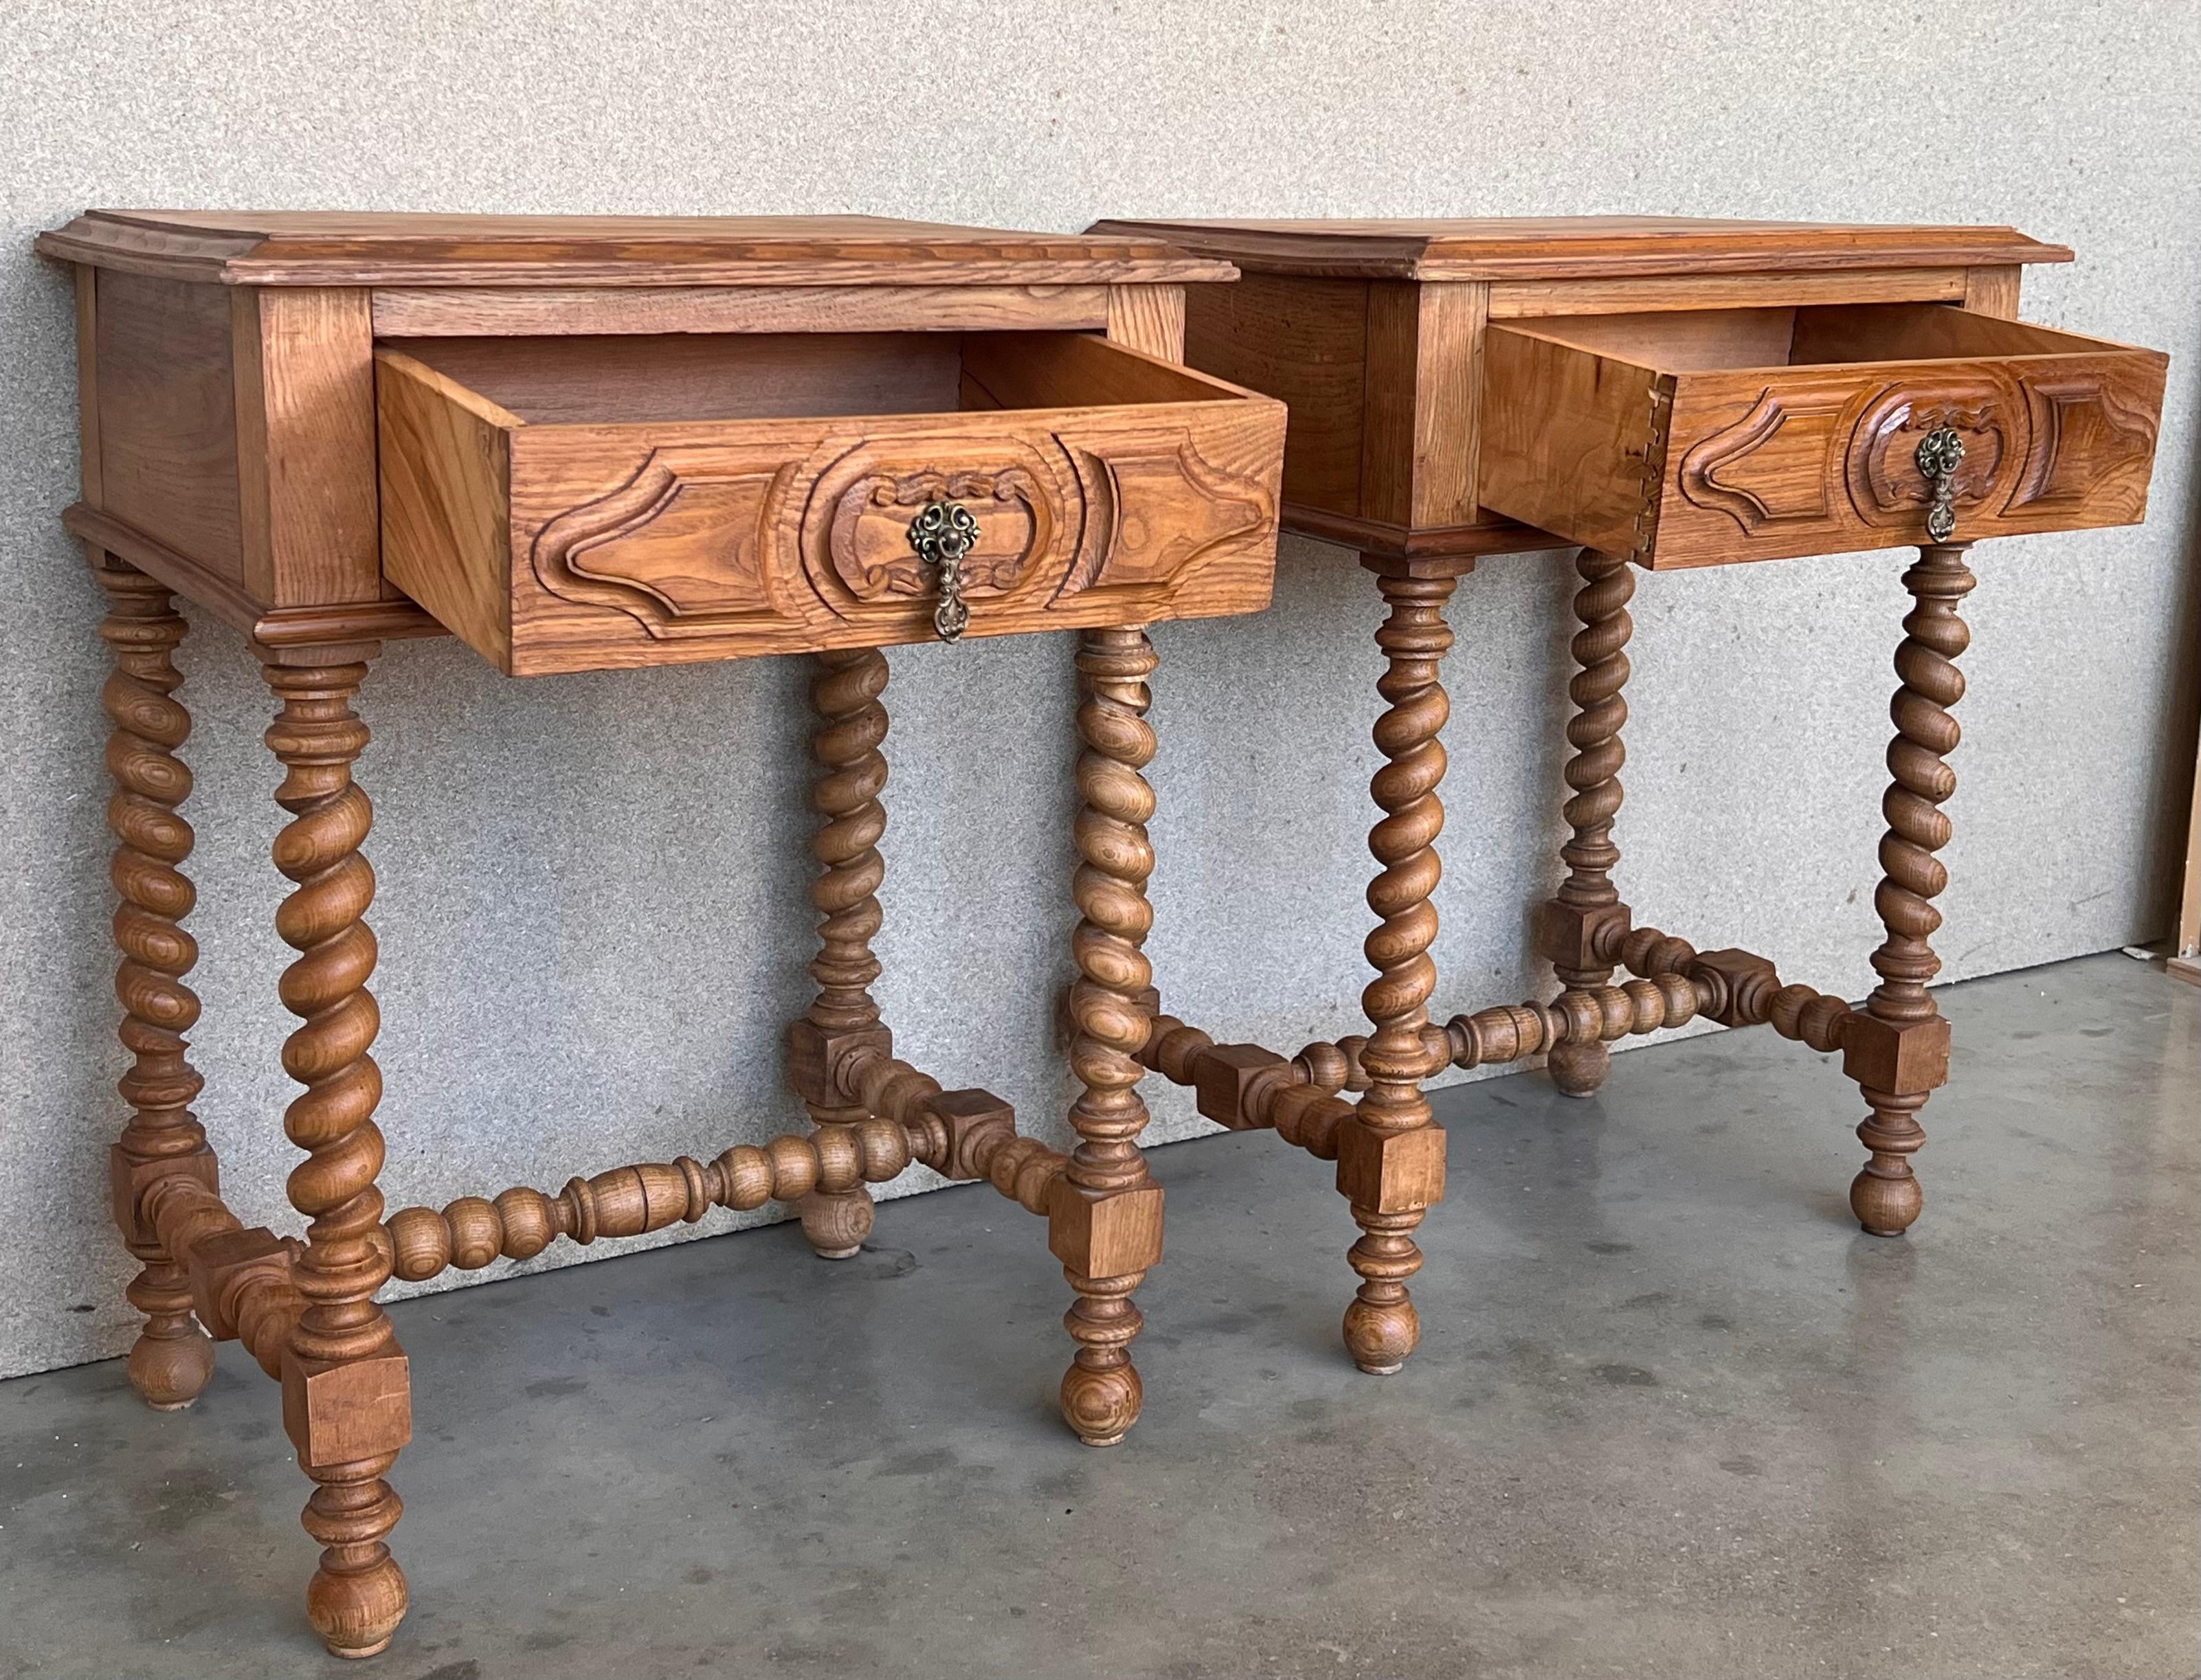 20th Century Vintage French Nightstands in Solid Carved Oak with Turned Columns, Set of 2